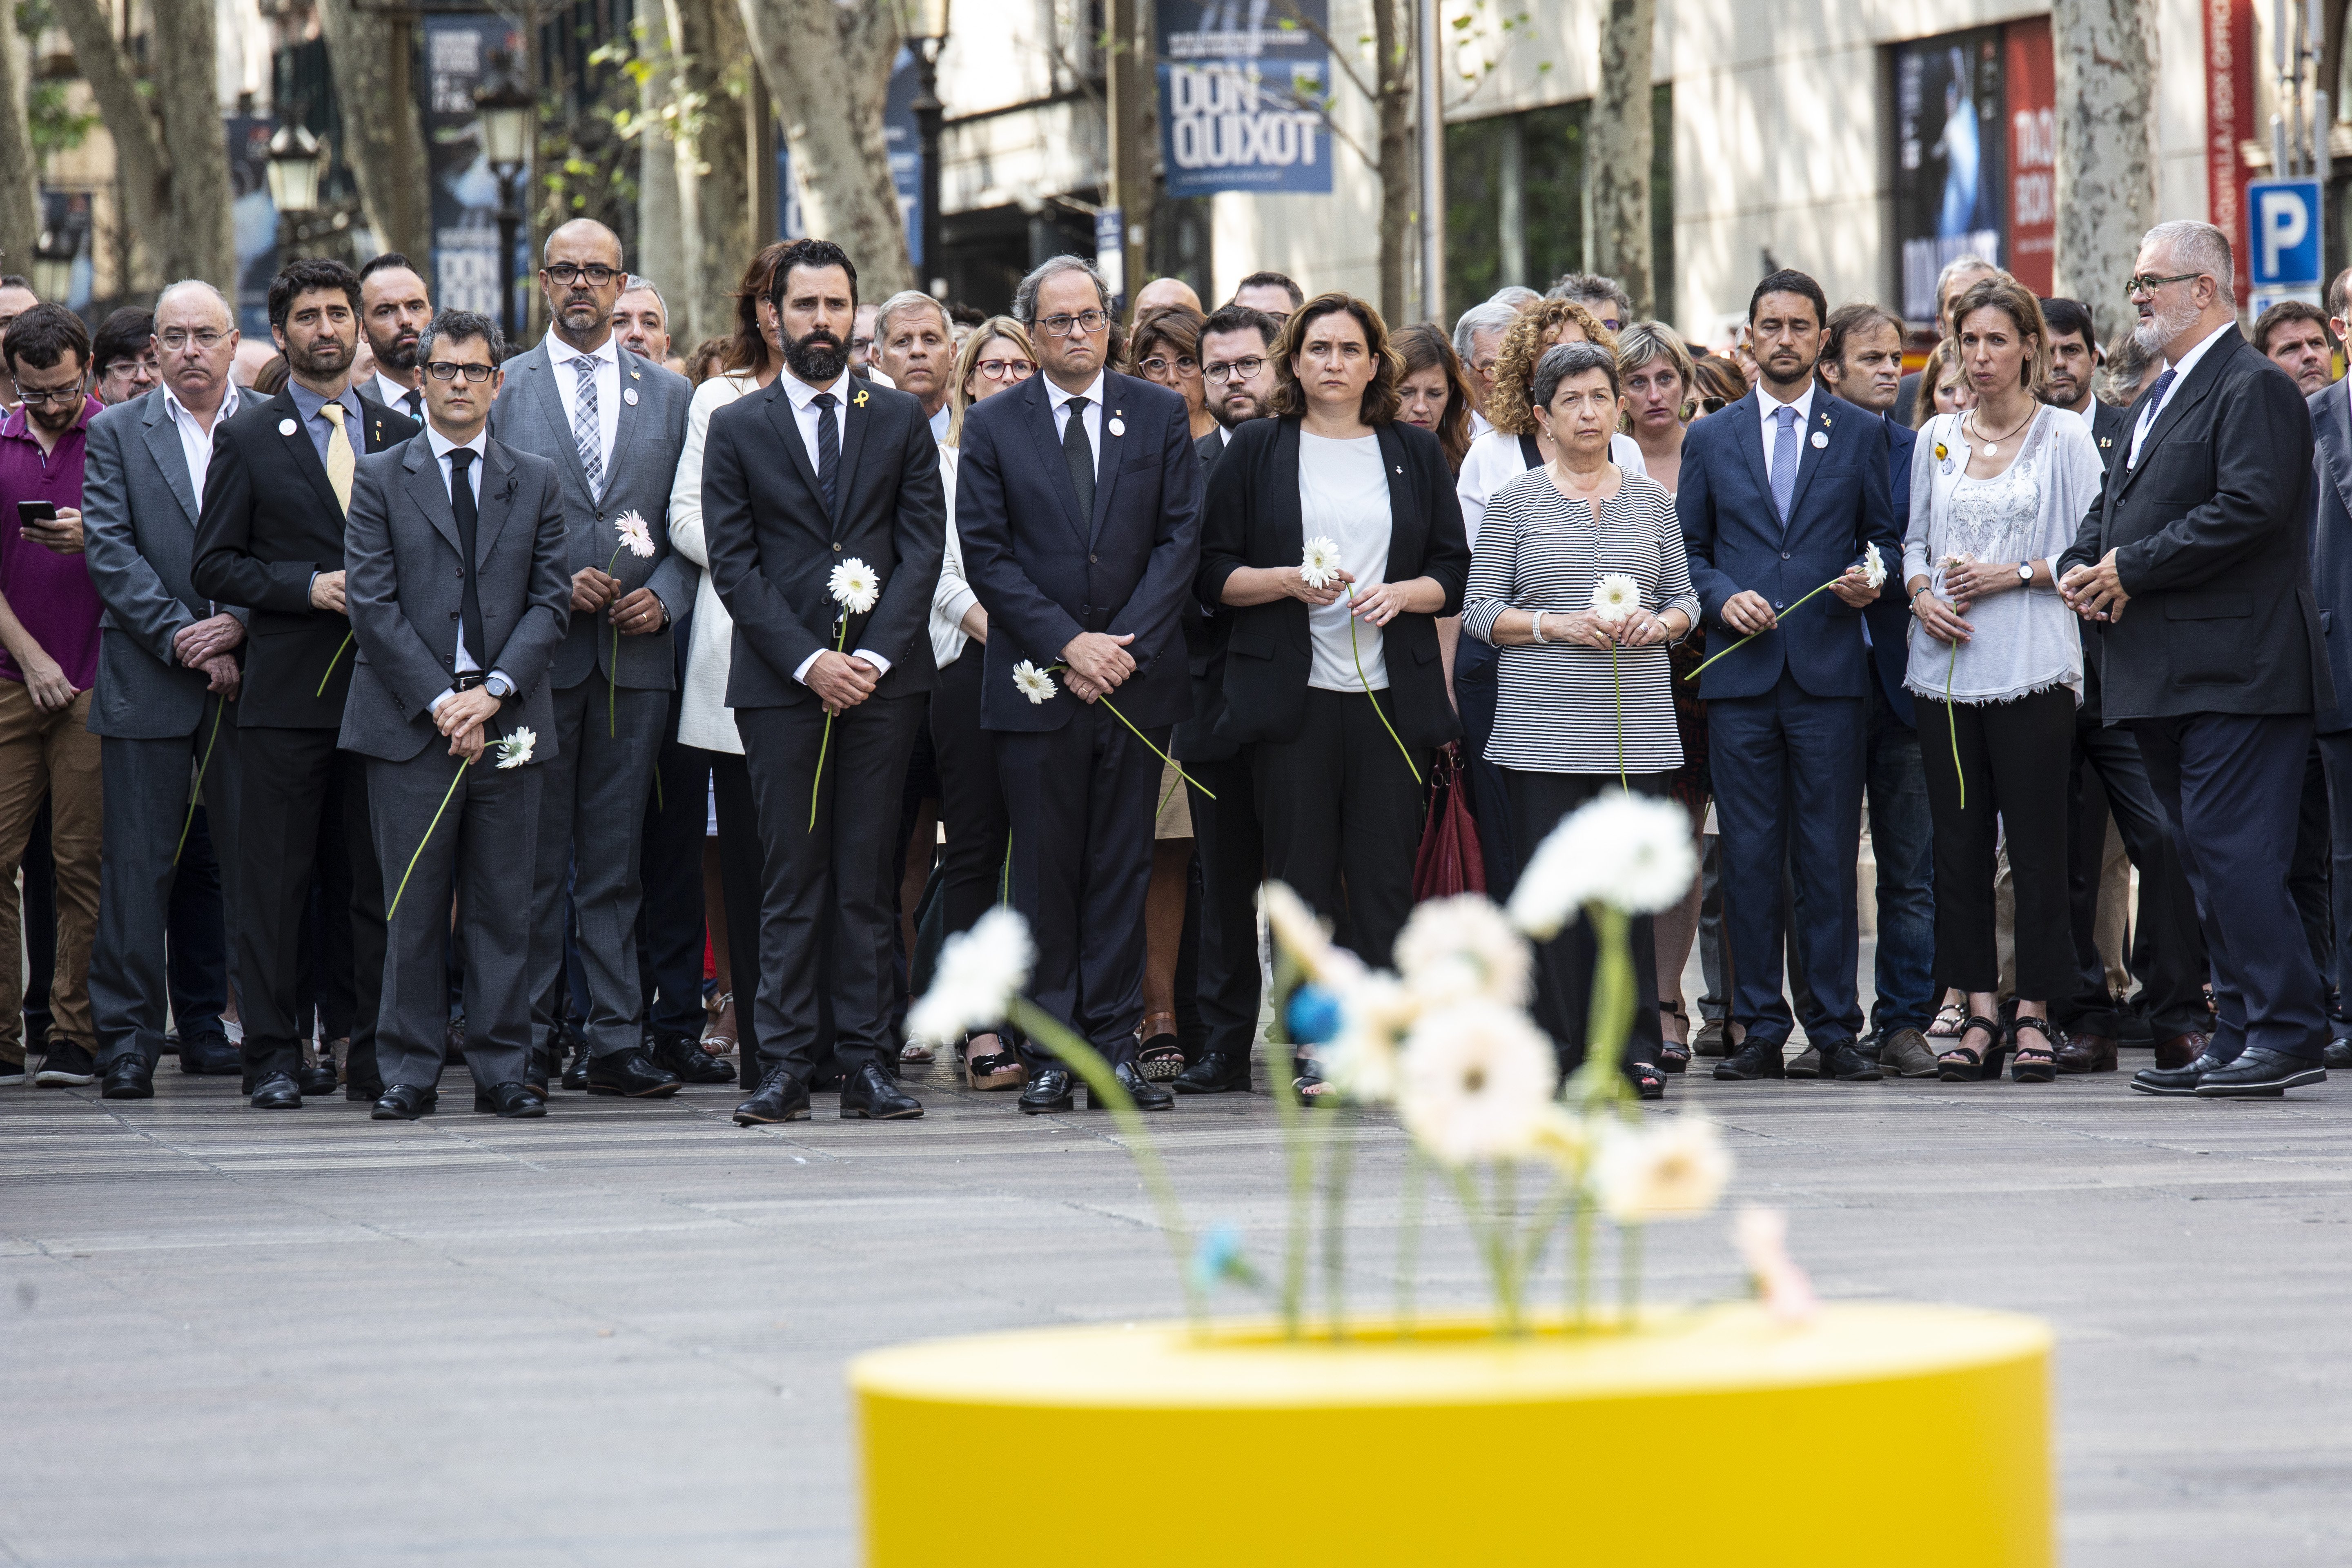 Spanish monarchy pressured government to stay away from Rambla floral offering